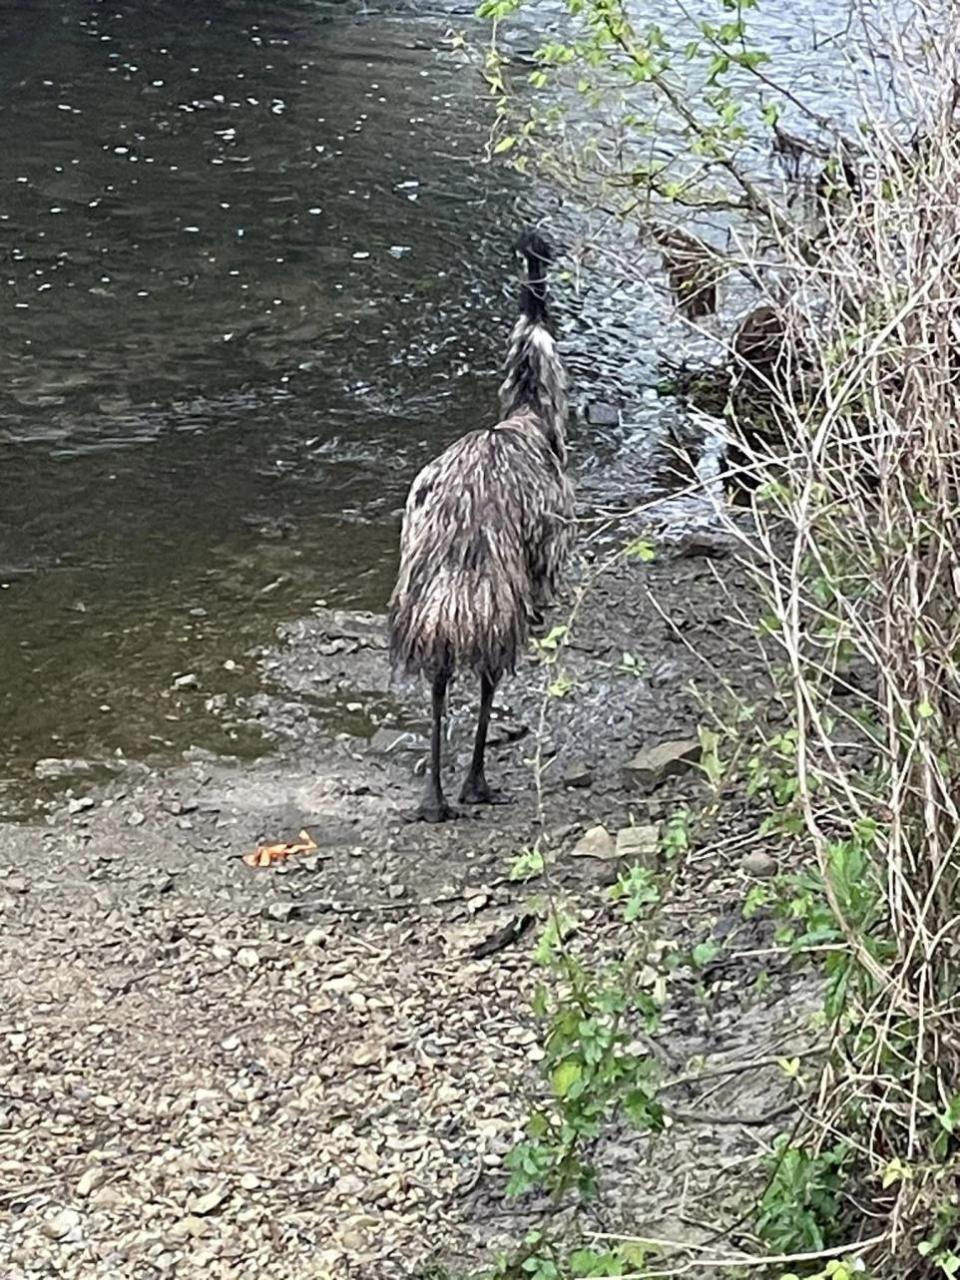 East Anglian Daily Times: The emu was found near a river